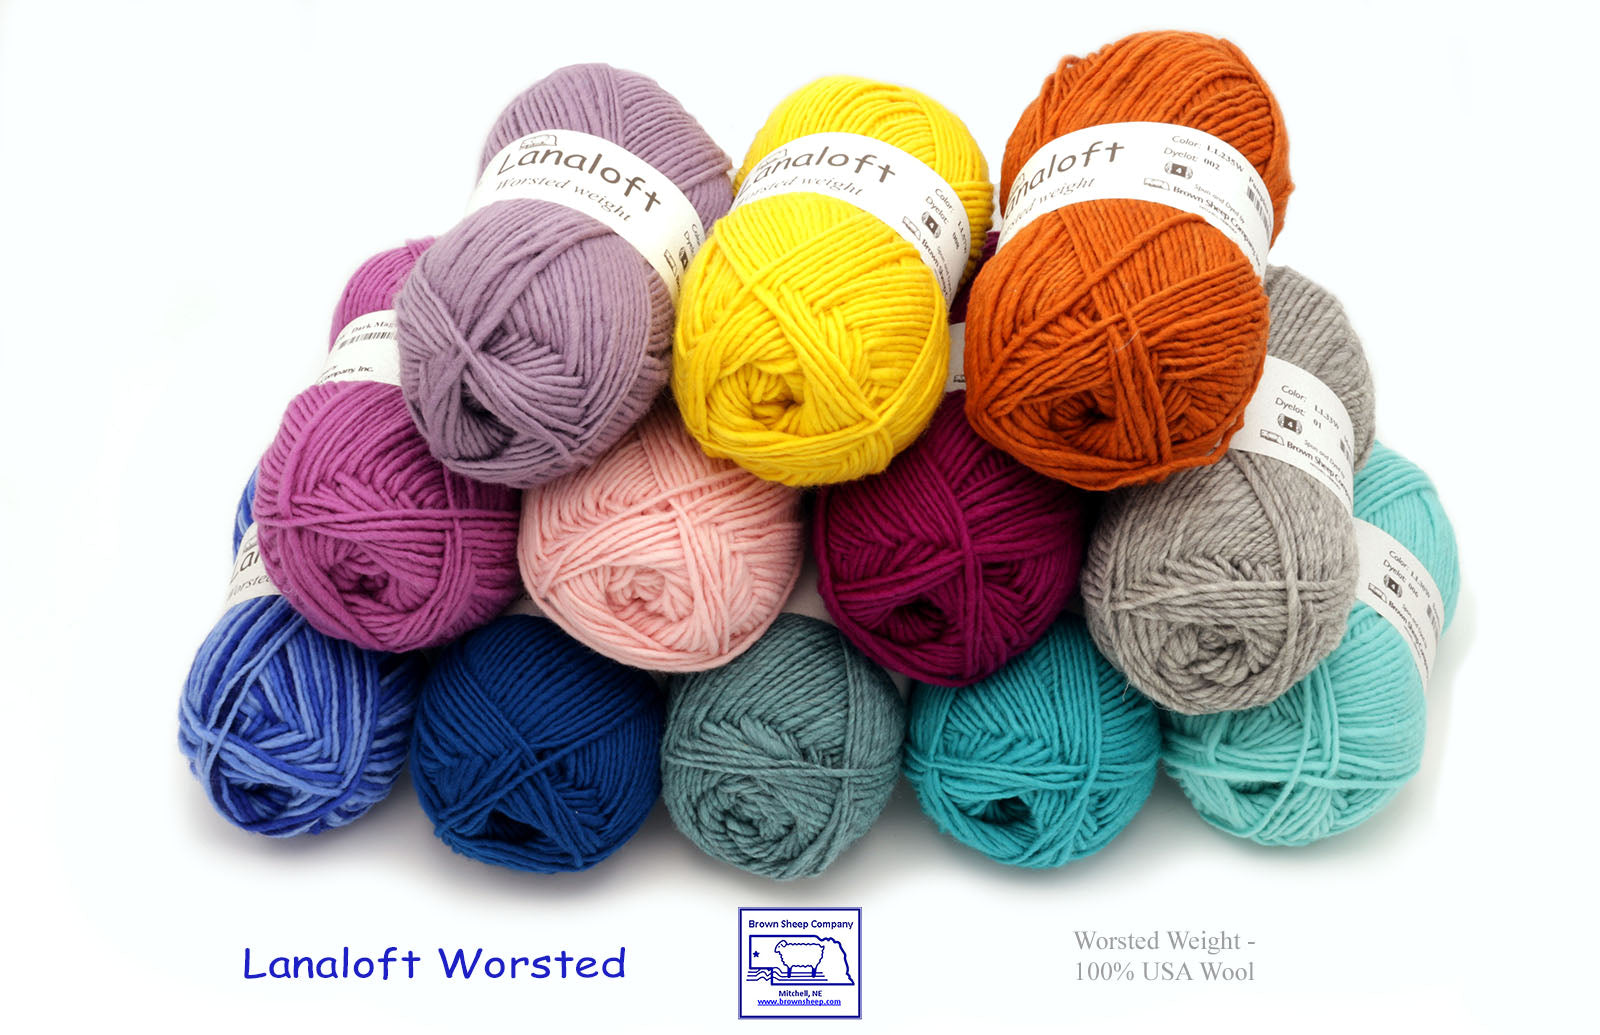 Chroma Twist Worsted Weight Yarn Review - The Loopy Lamb